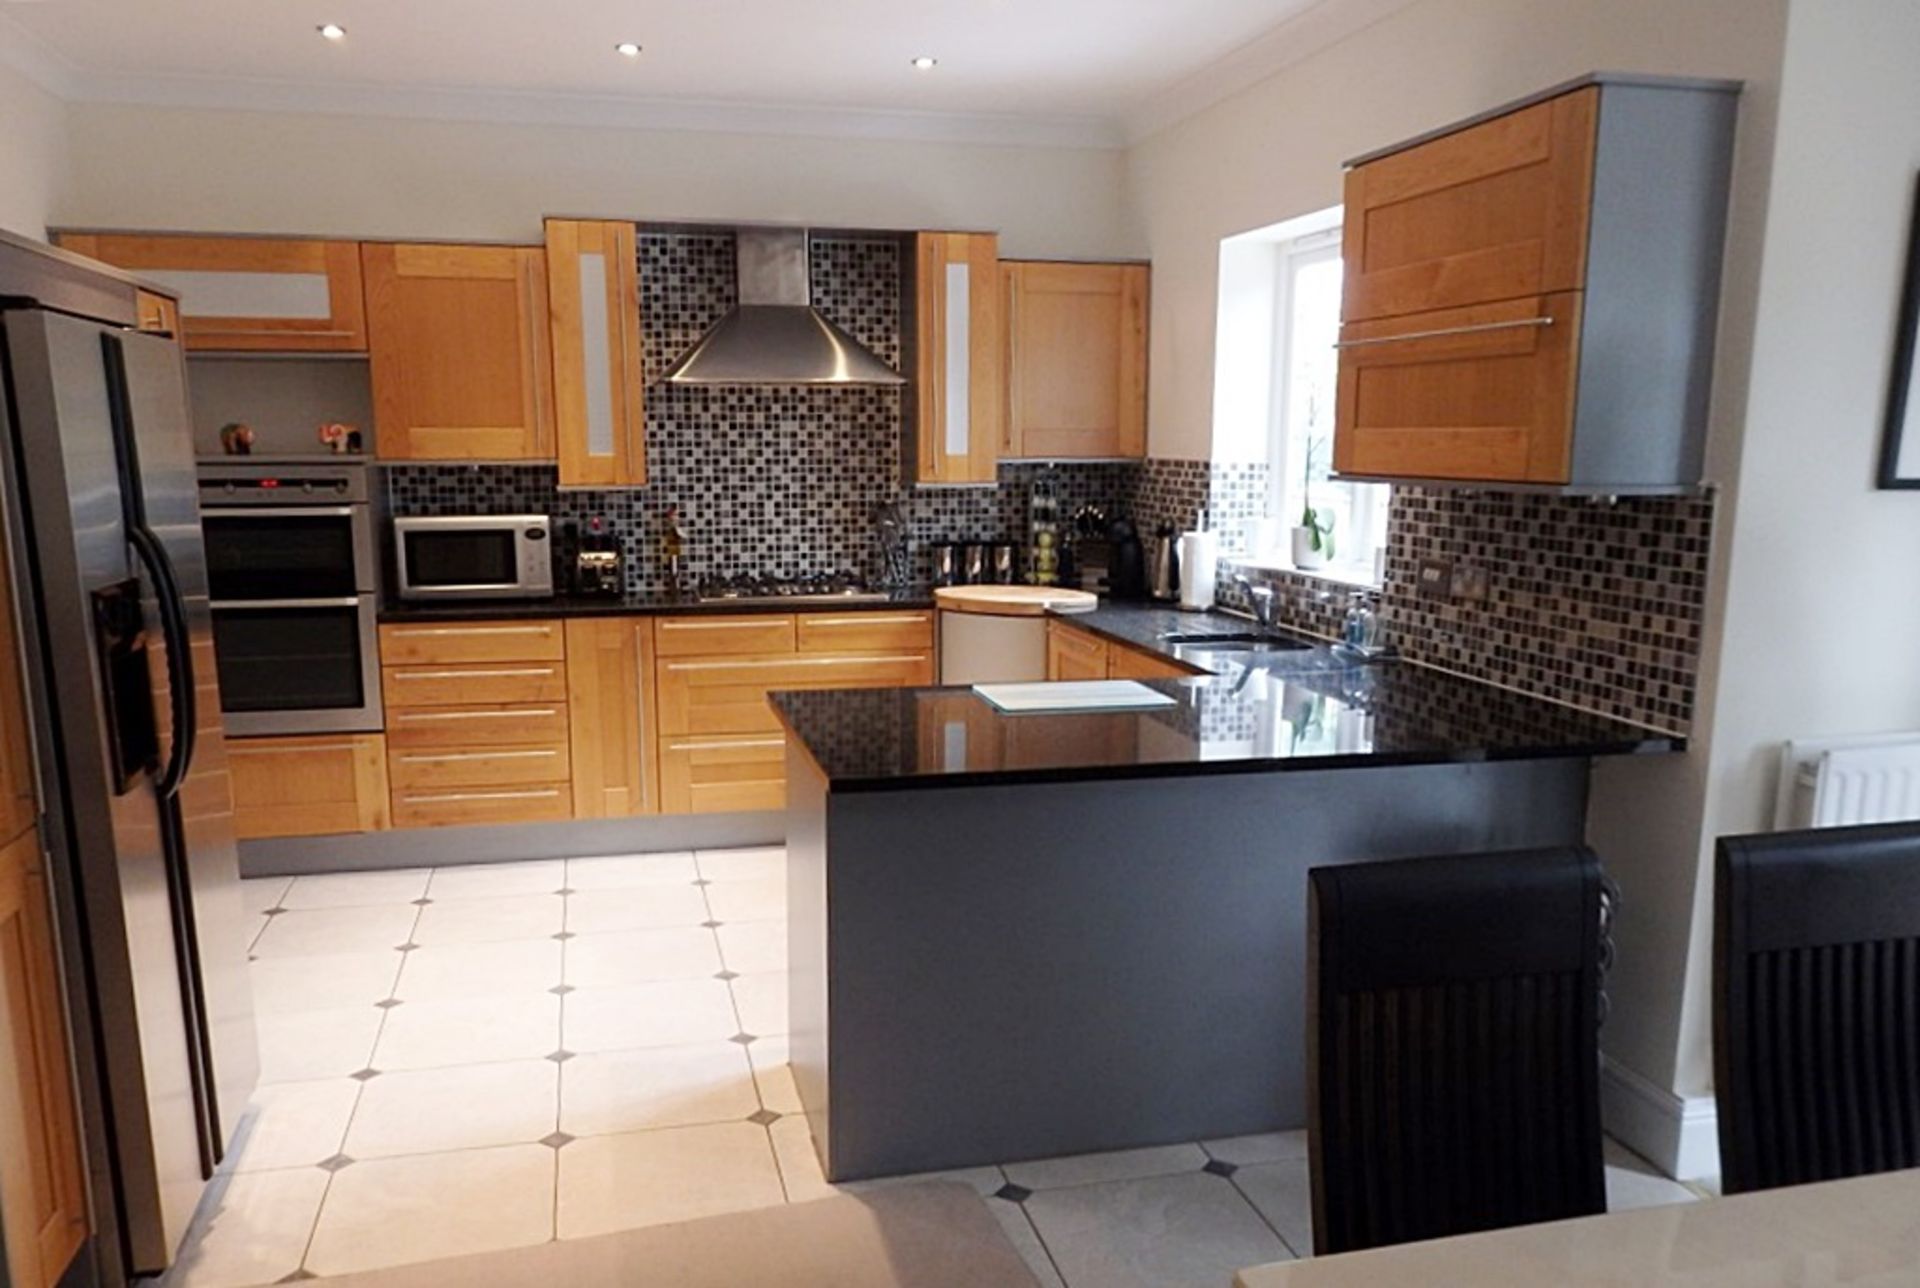 1 x Solid Wood Fitted Kitchen By Panorama - Features Luxurious Black Granite Worktops, Integrated - Image 17 of 31